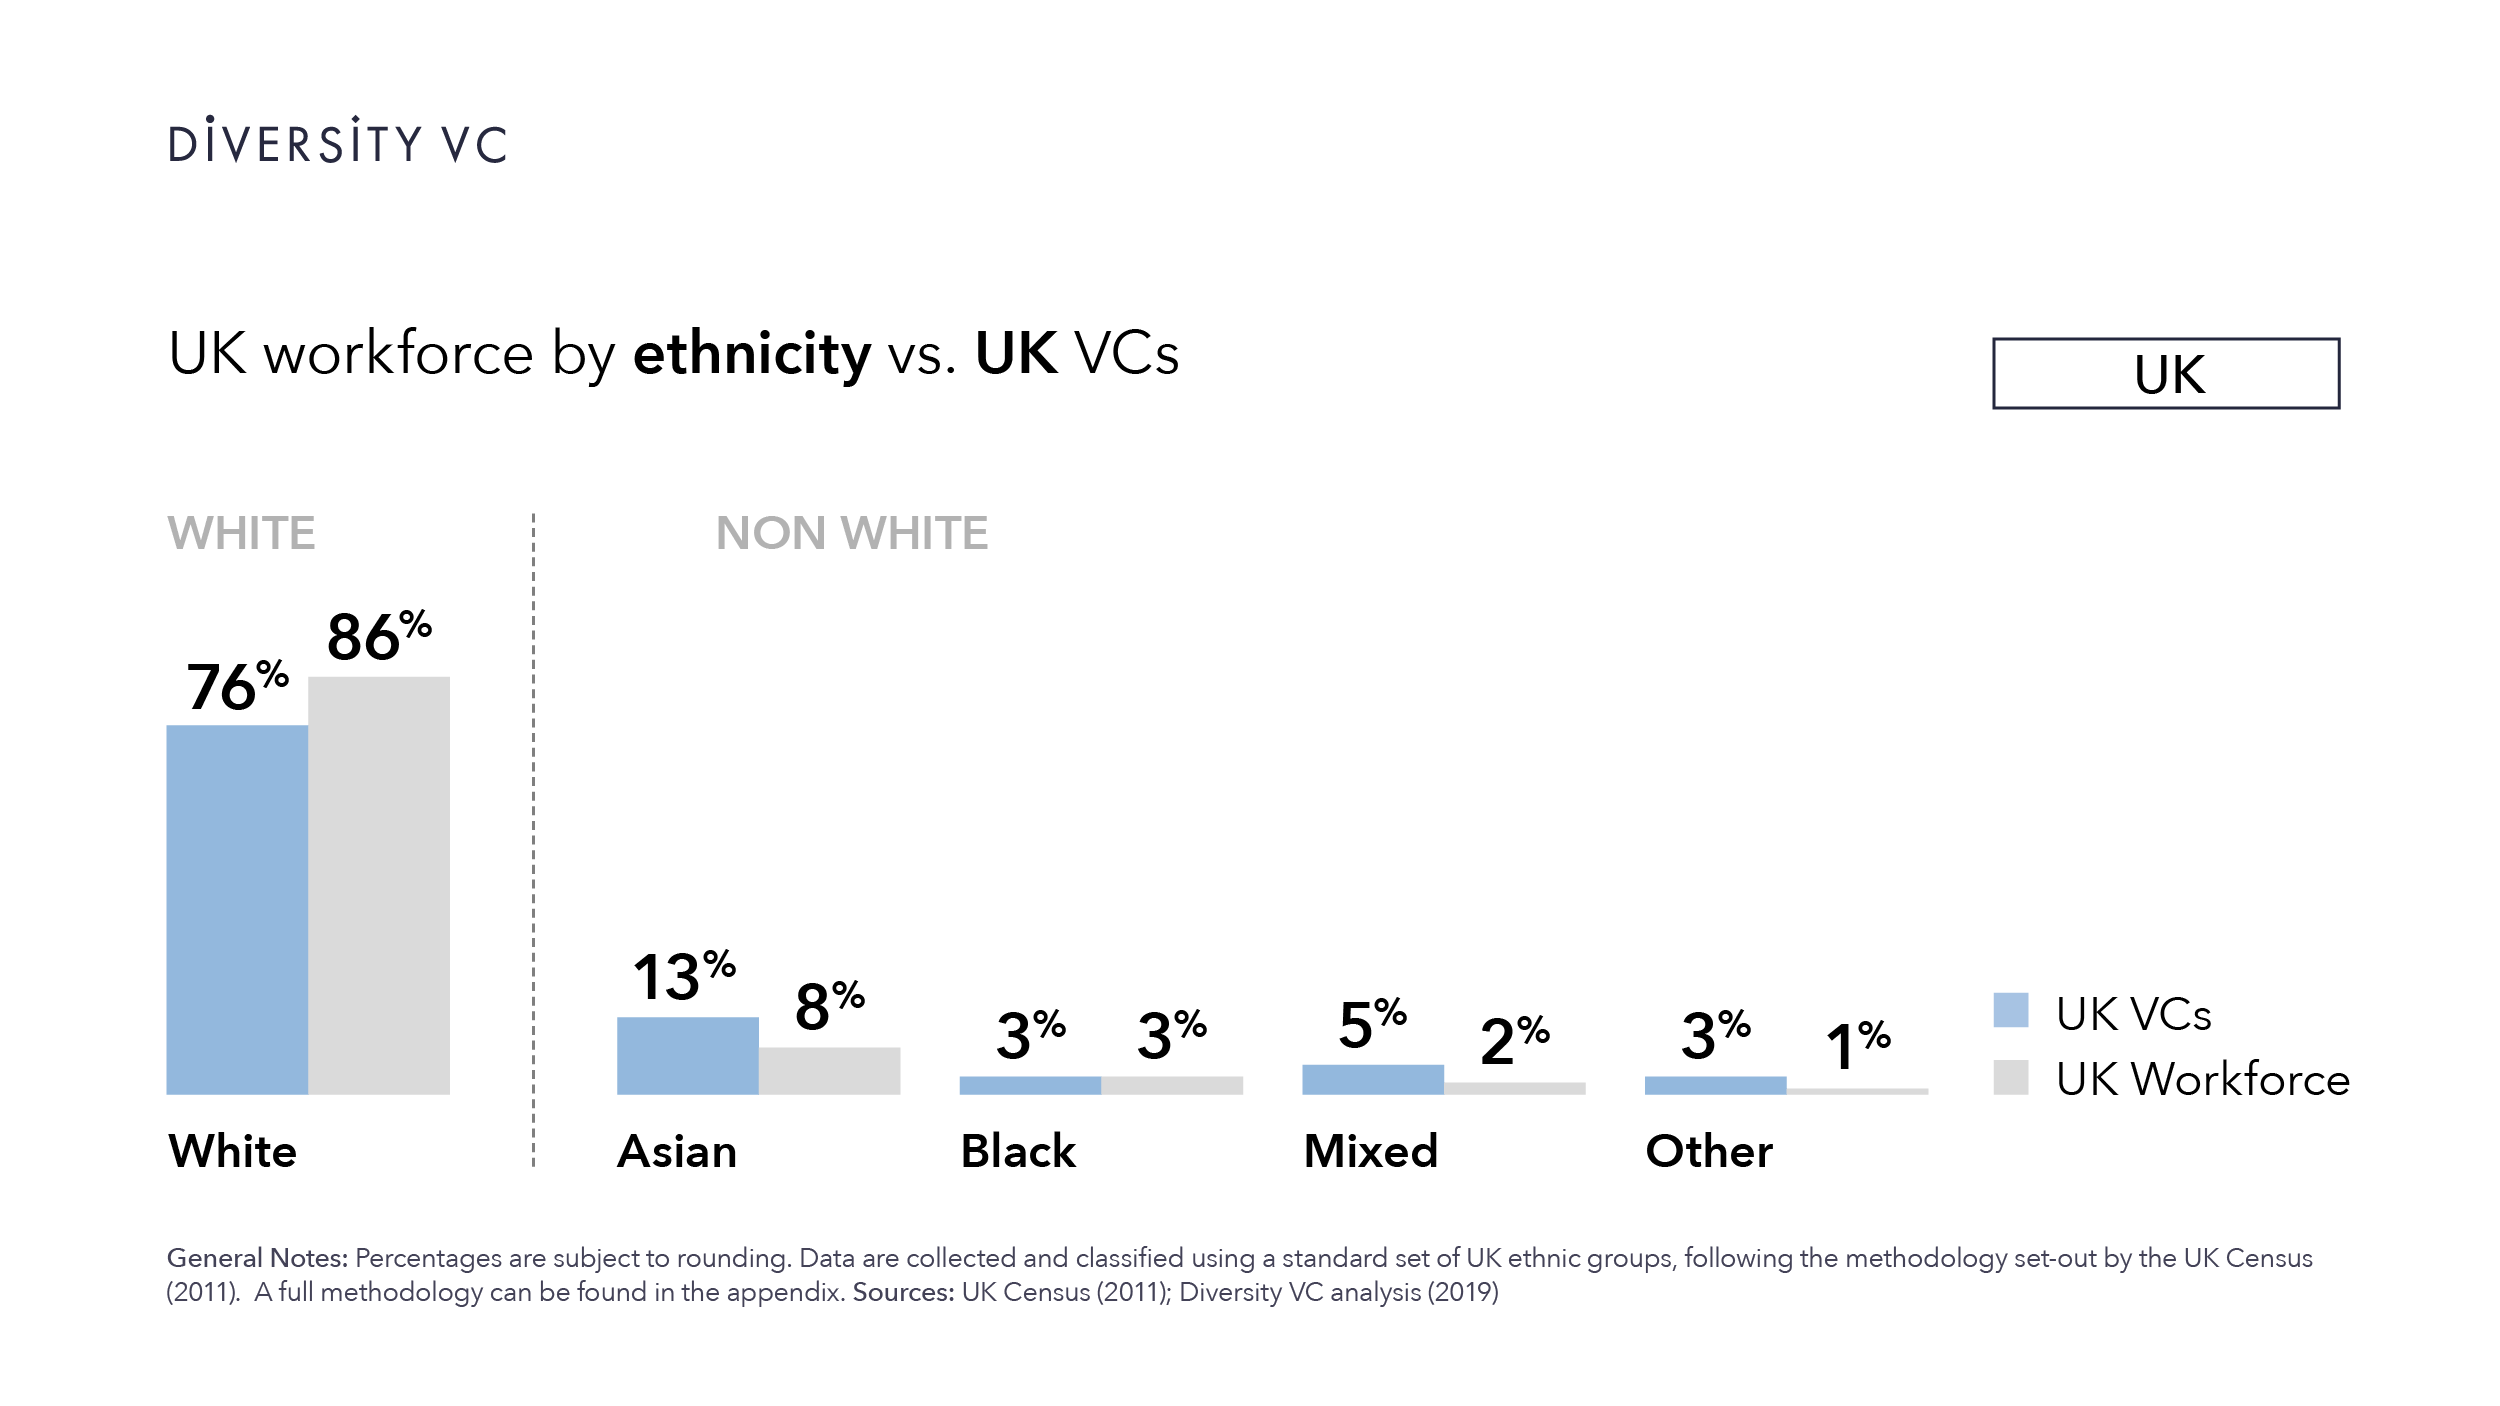 Graphic: UK VCs are more ethnically diverse than the UK workforce as a whole